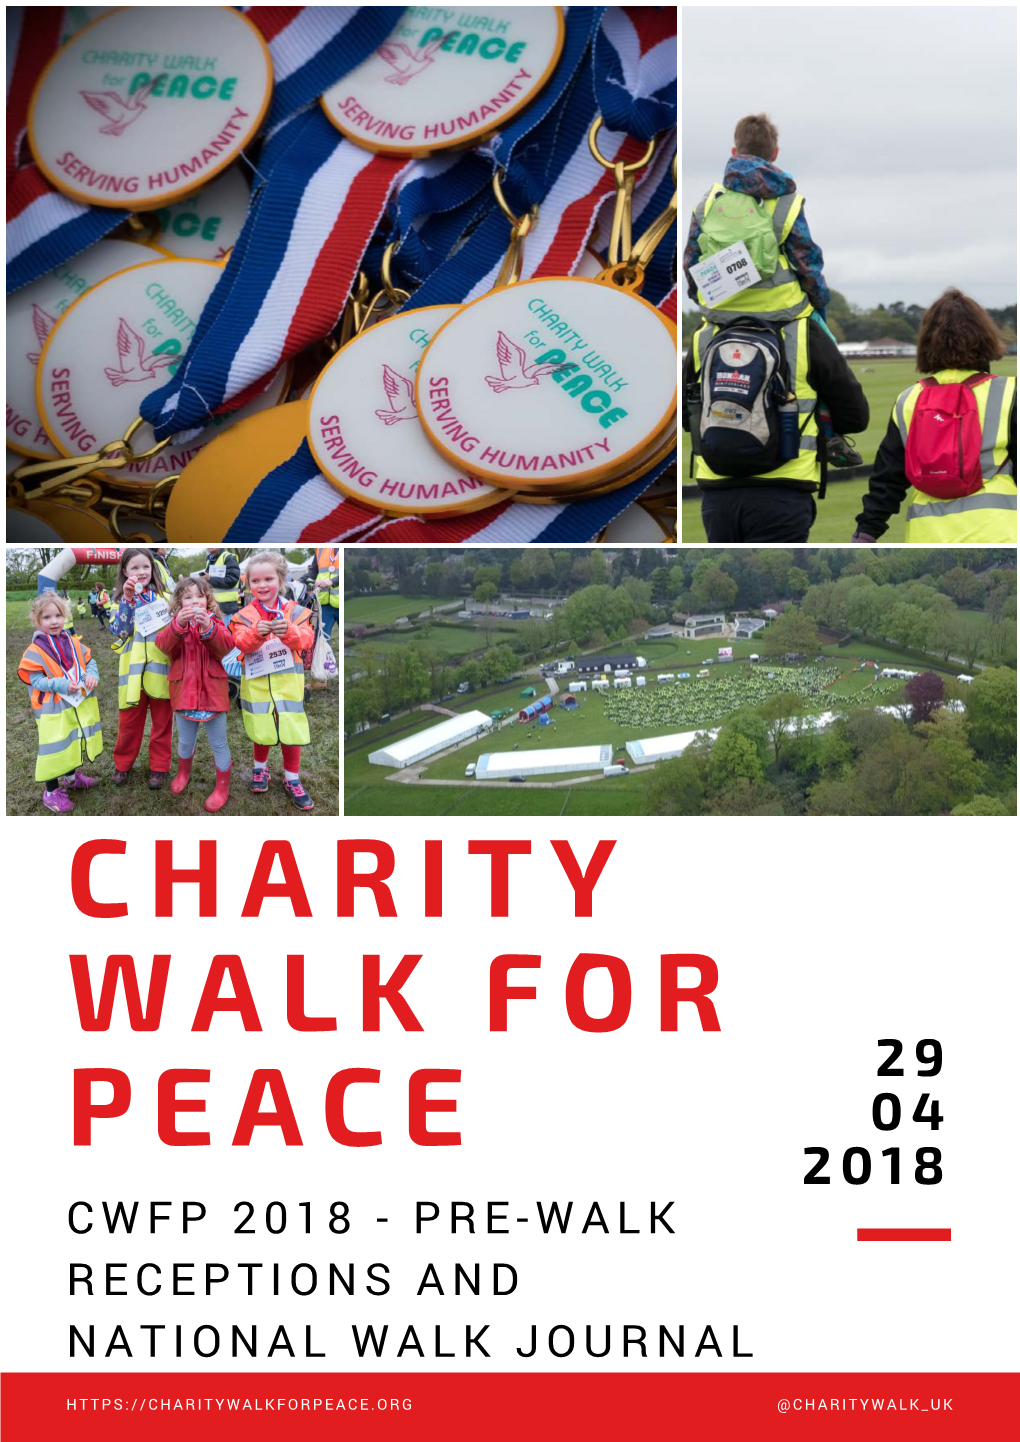 Charity Walk for Peace Facts